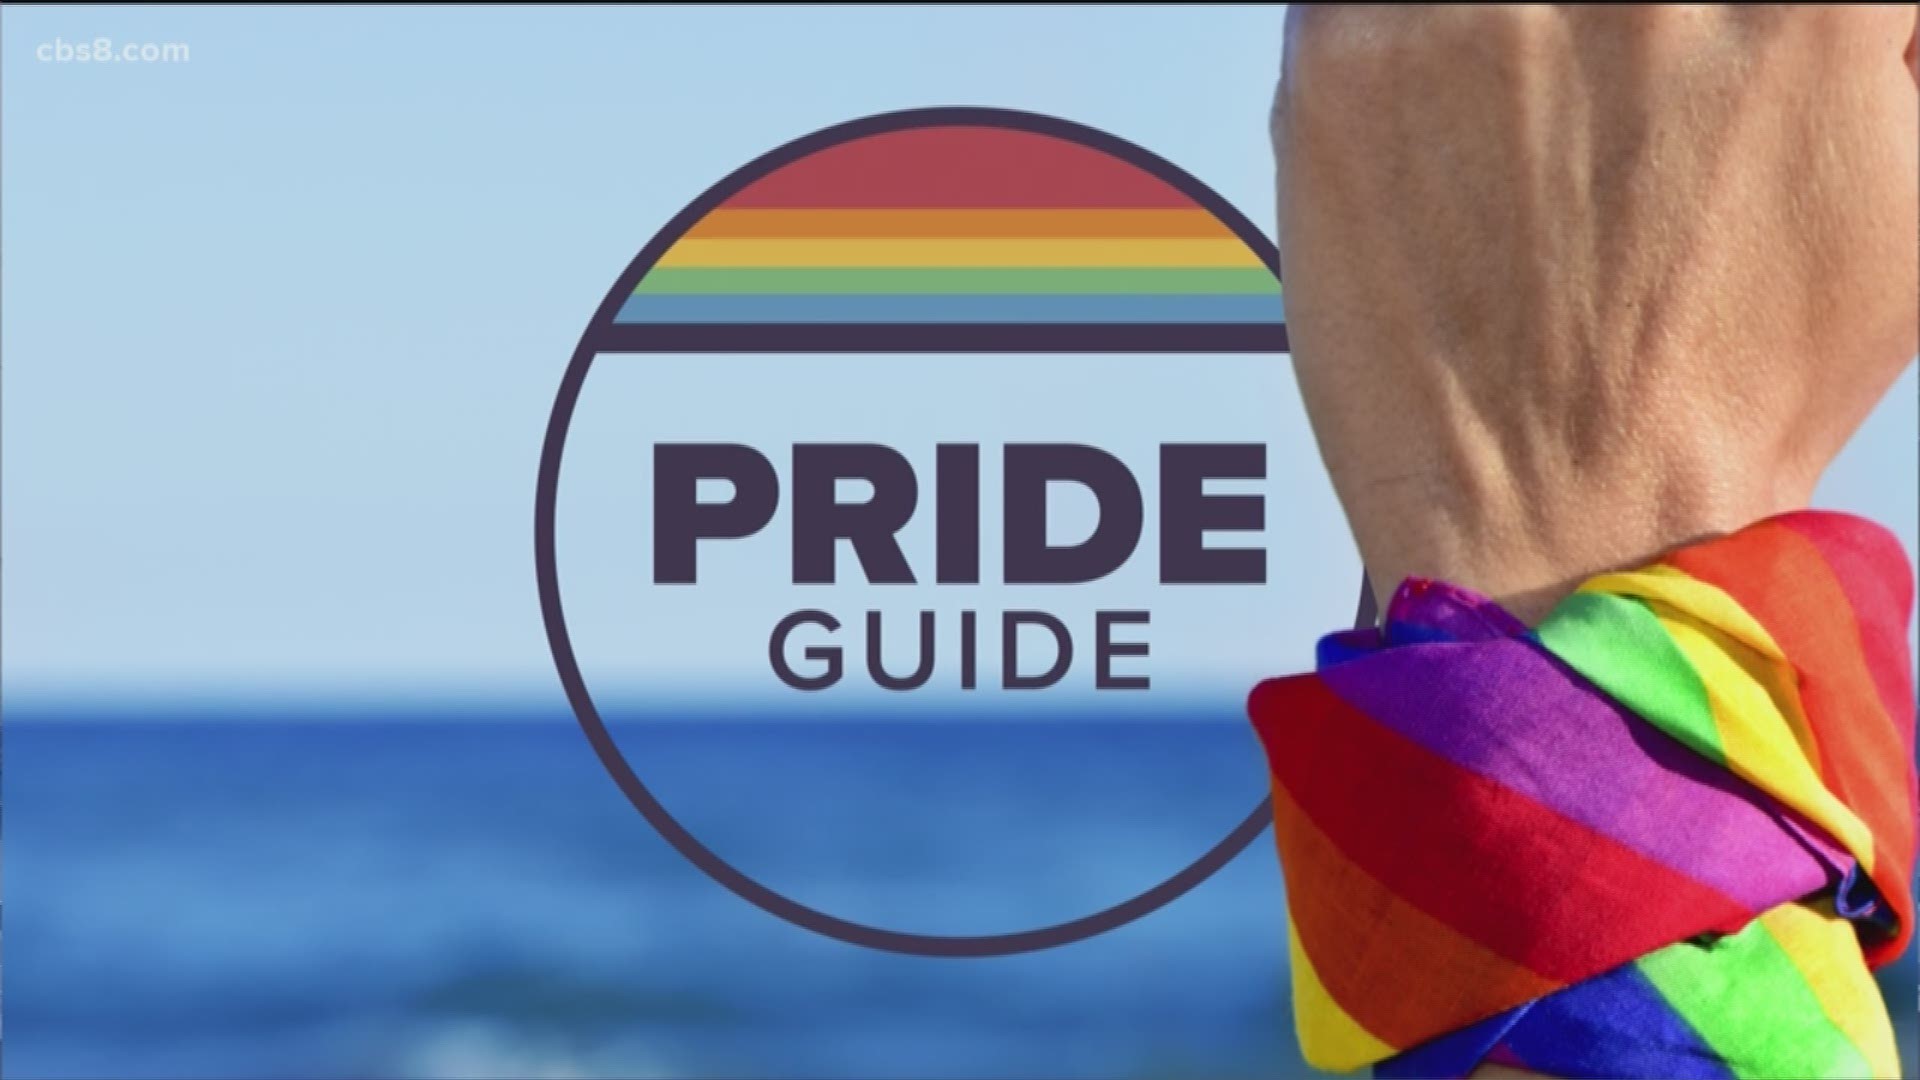 The annual San Diego Pride Parade is among the largest in the United States drawing crowds of over 250,000 to support the LGBTQ community.